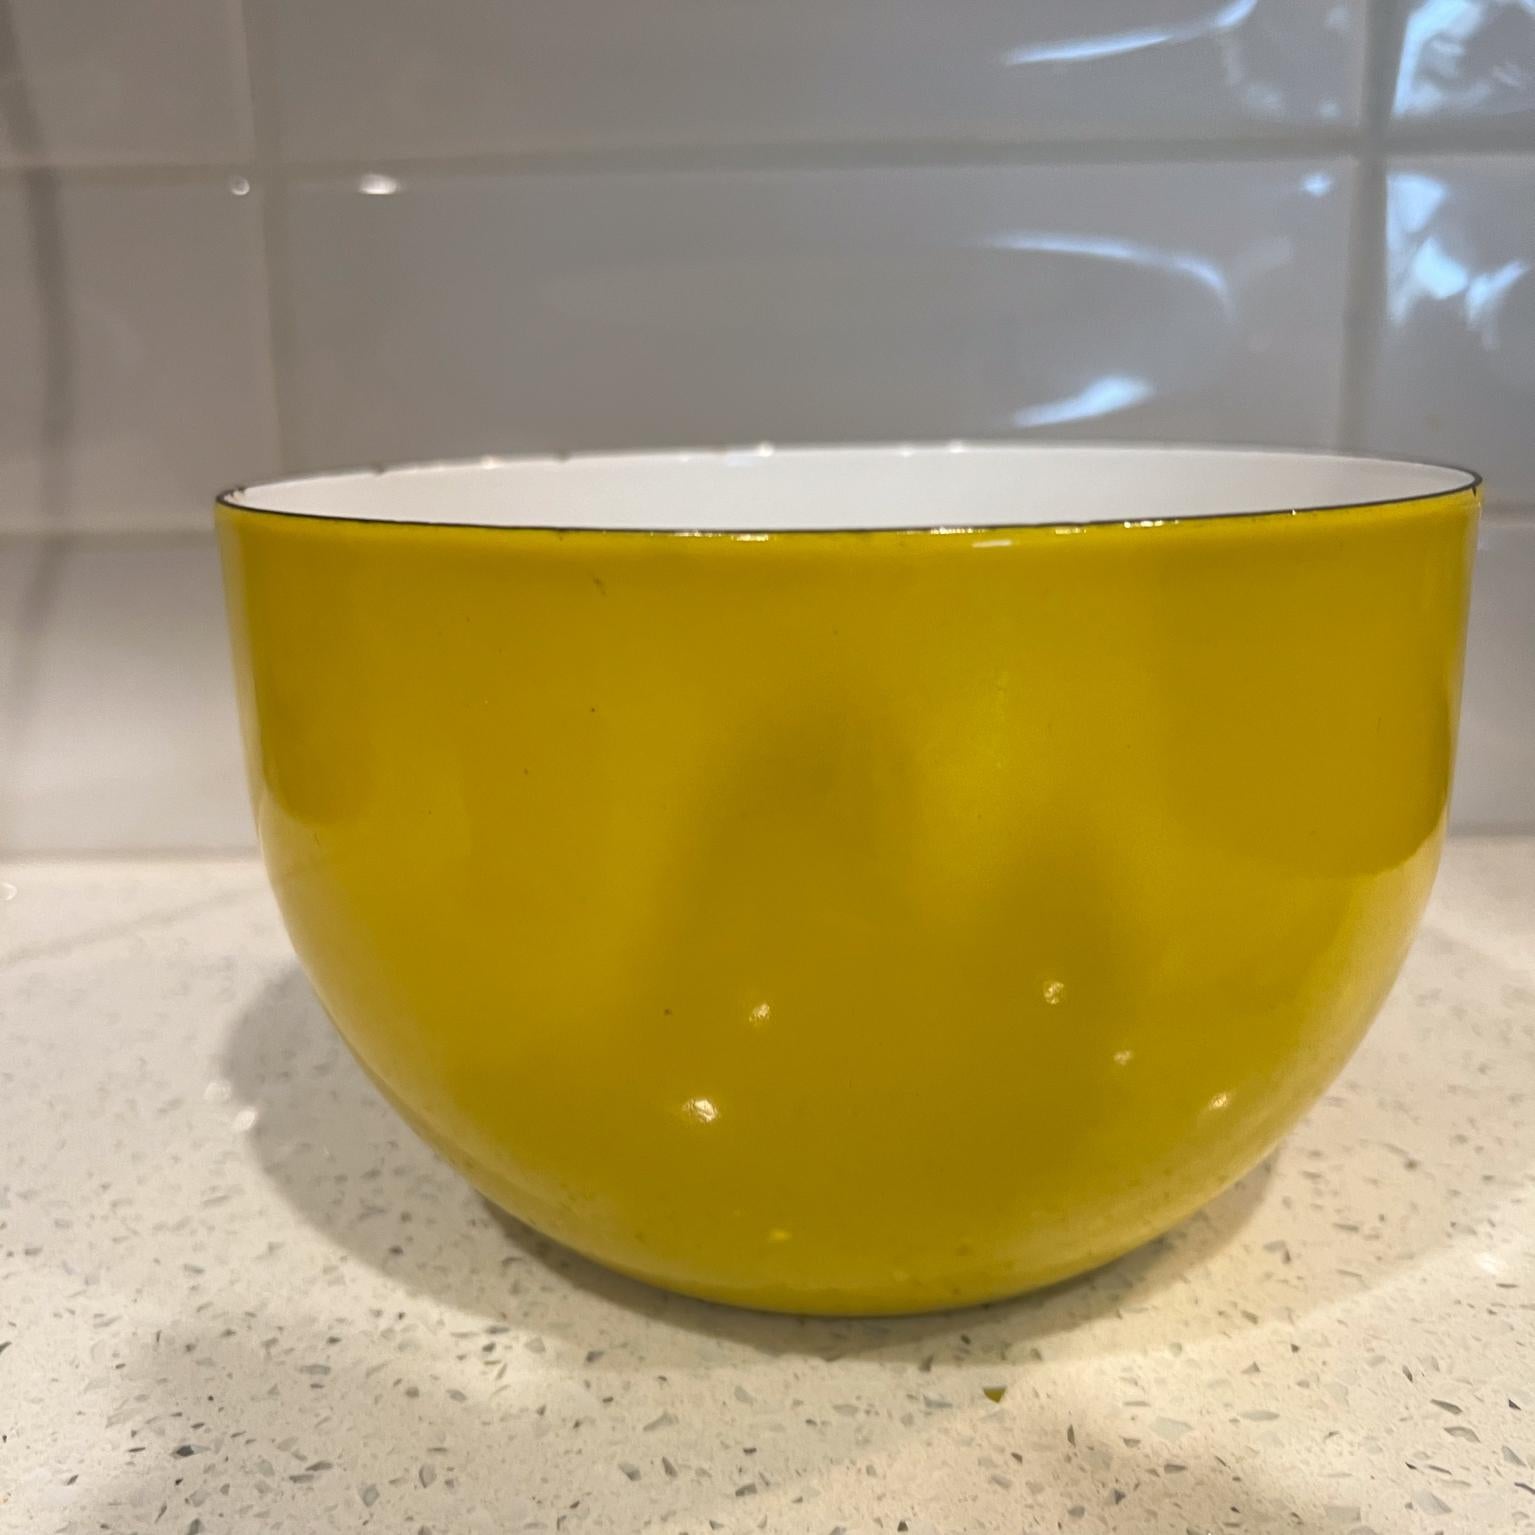 Scandinavian Modern Yellow Enamel Serving Mixing Bowl
6.38 diameter x 4 h
Preowned vintage unrestored condition, please see images provided.